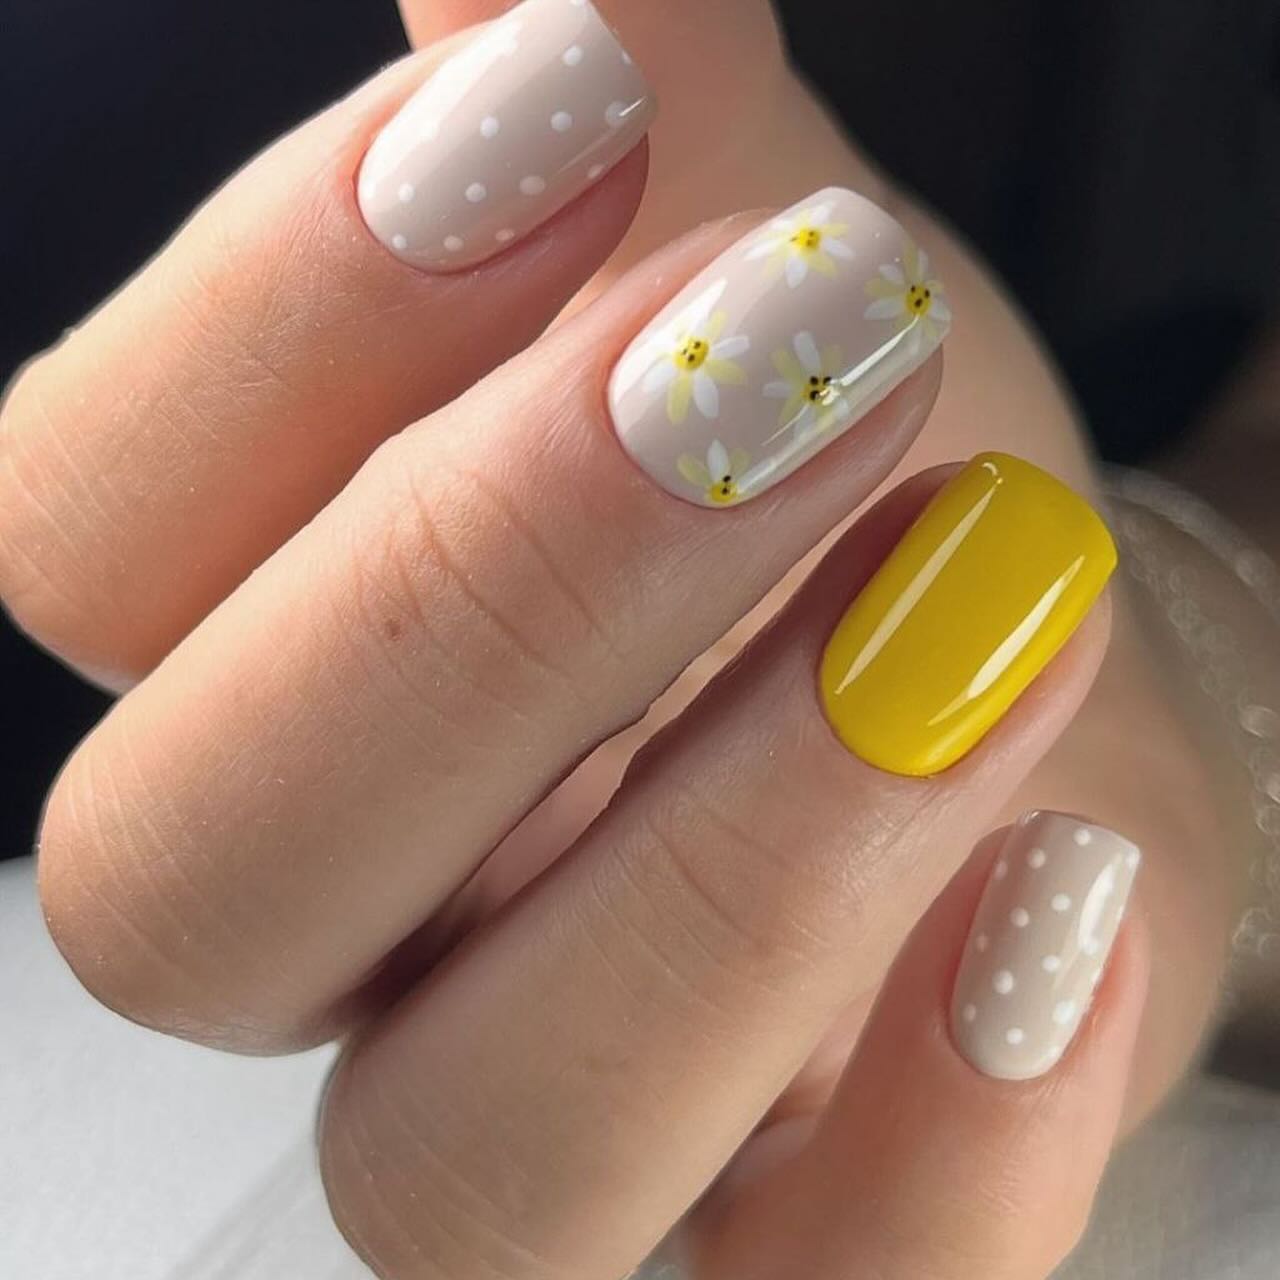 100+ Short Nail Designs You’ll Want To Try This Year images 11